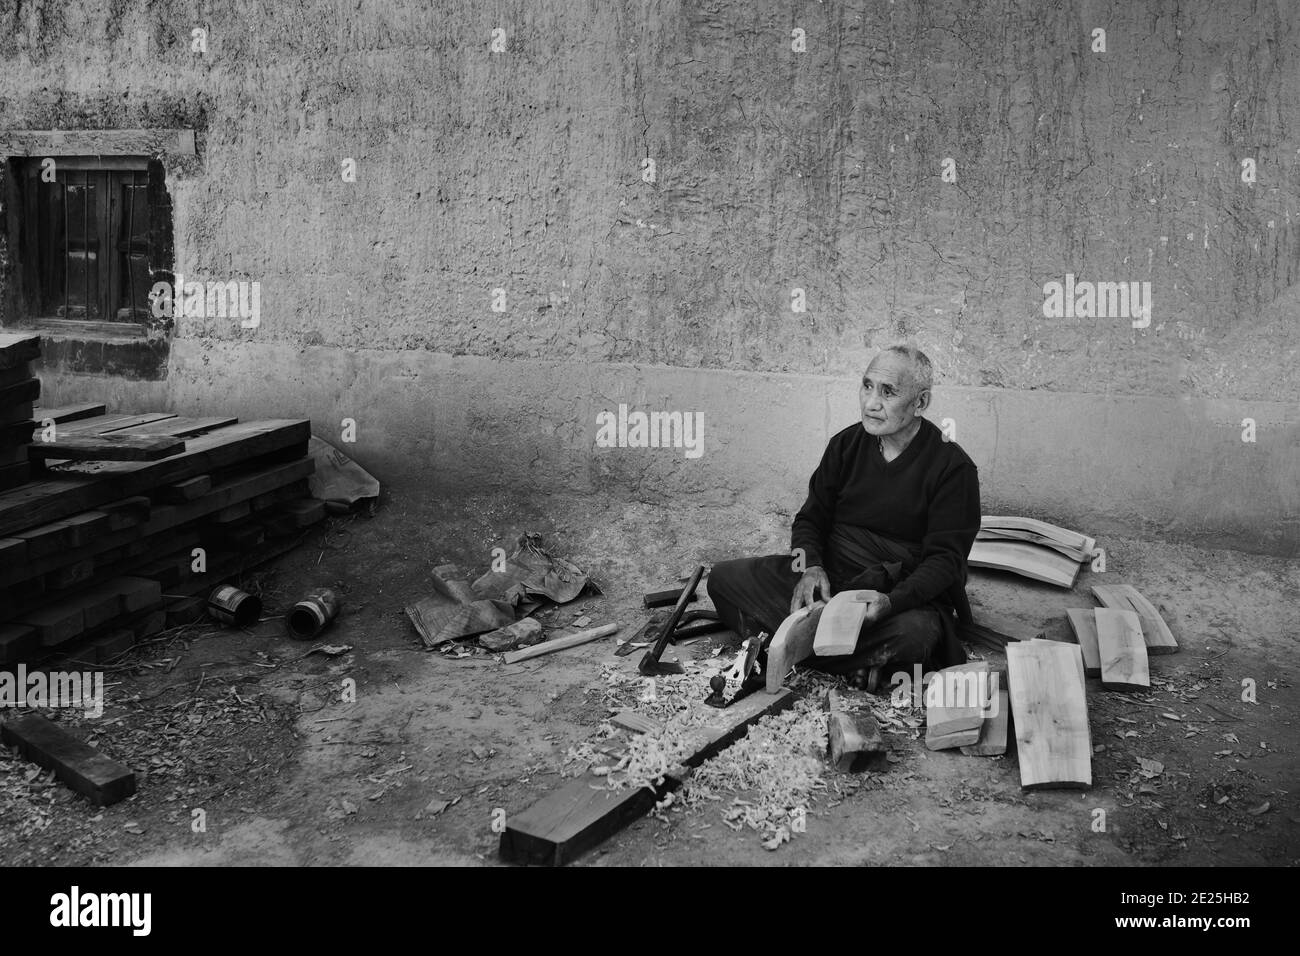 A Buddhist monk sitting lone working wood to make a barrel outside monastery in Tabo, Himachal Pradesh, India. Stock Photo